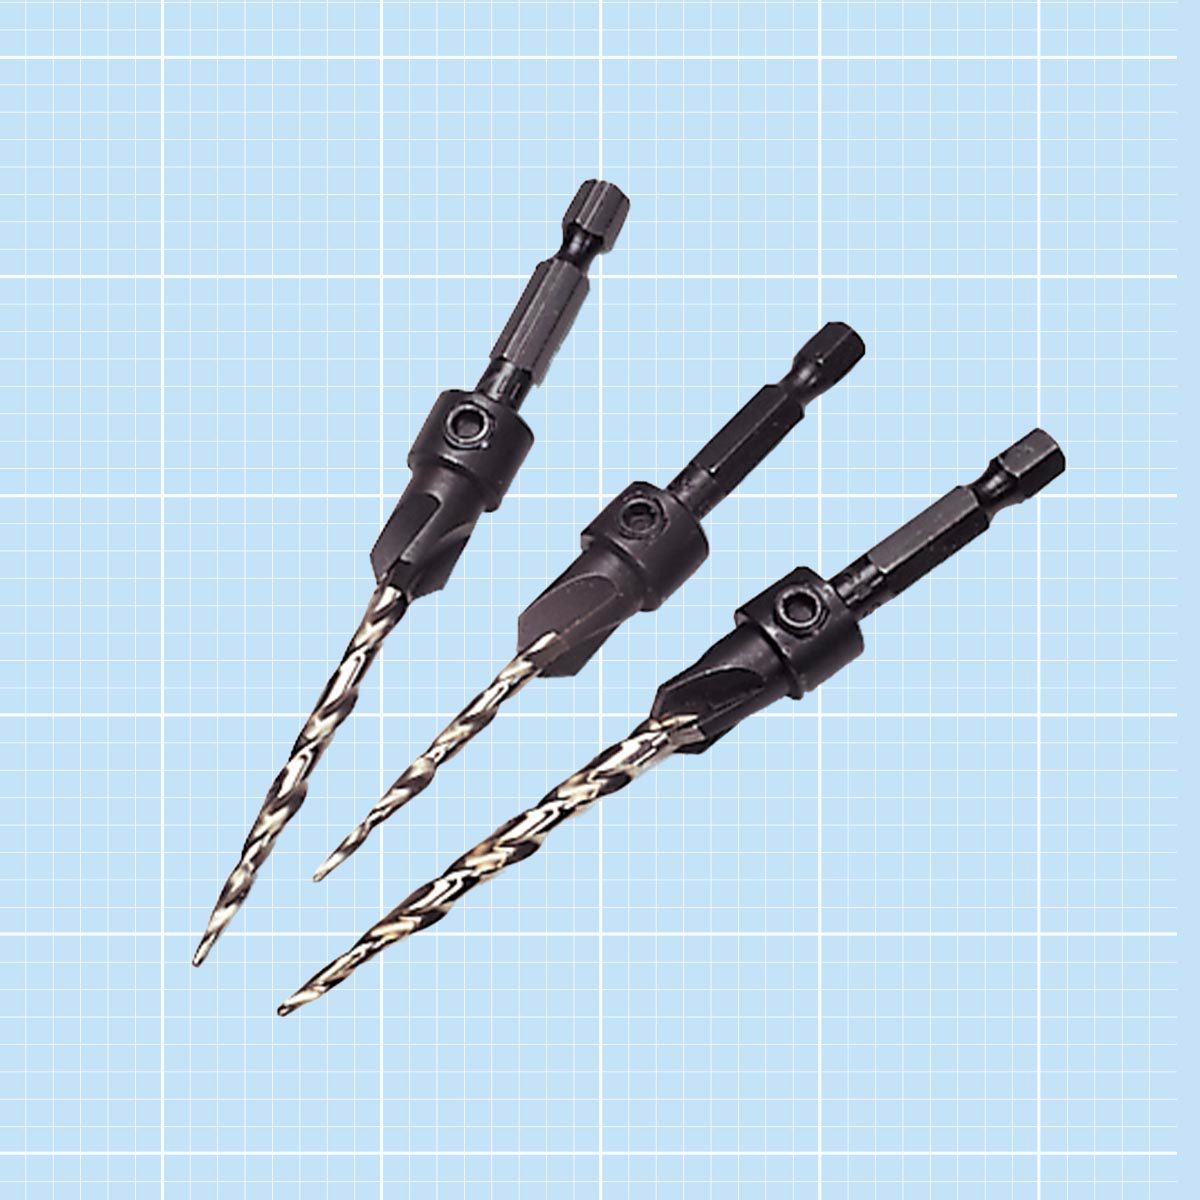 Three countersink drill bits on a blue grid background